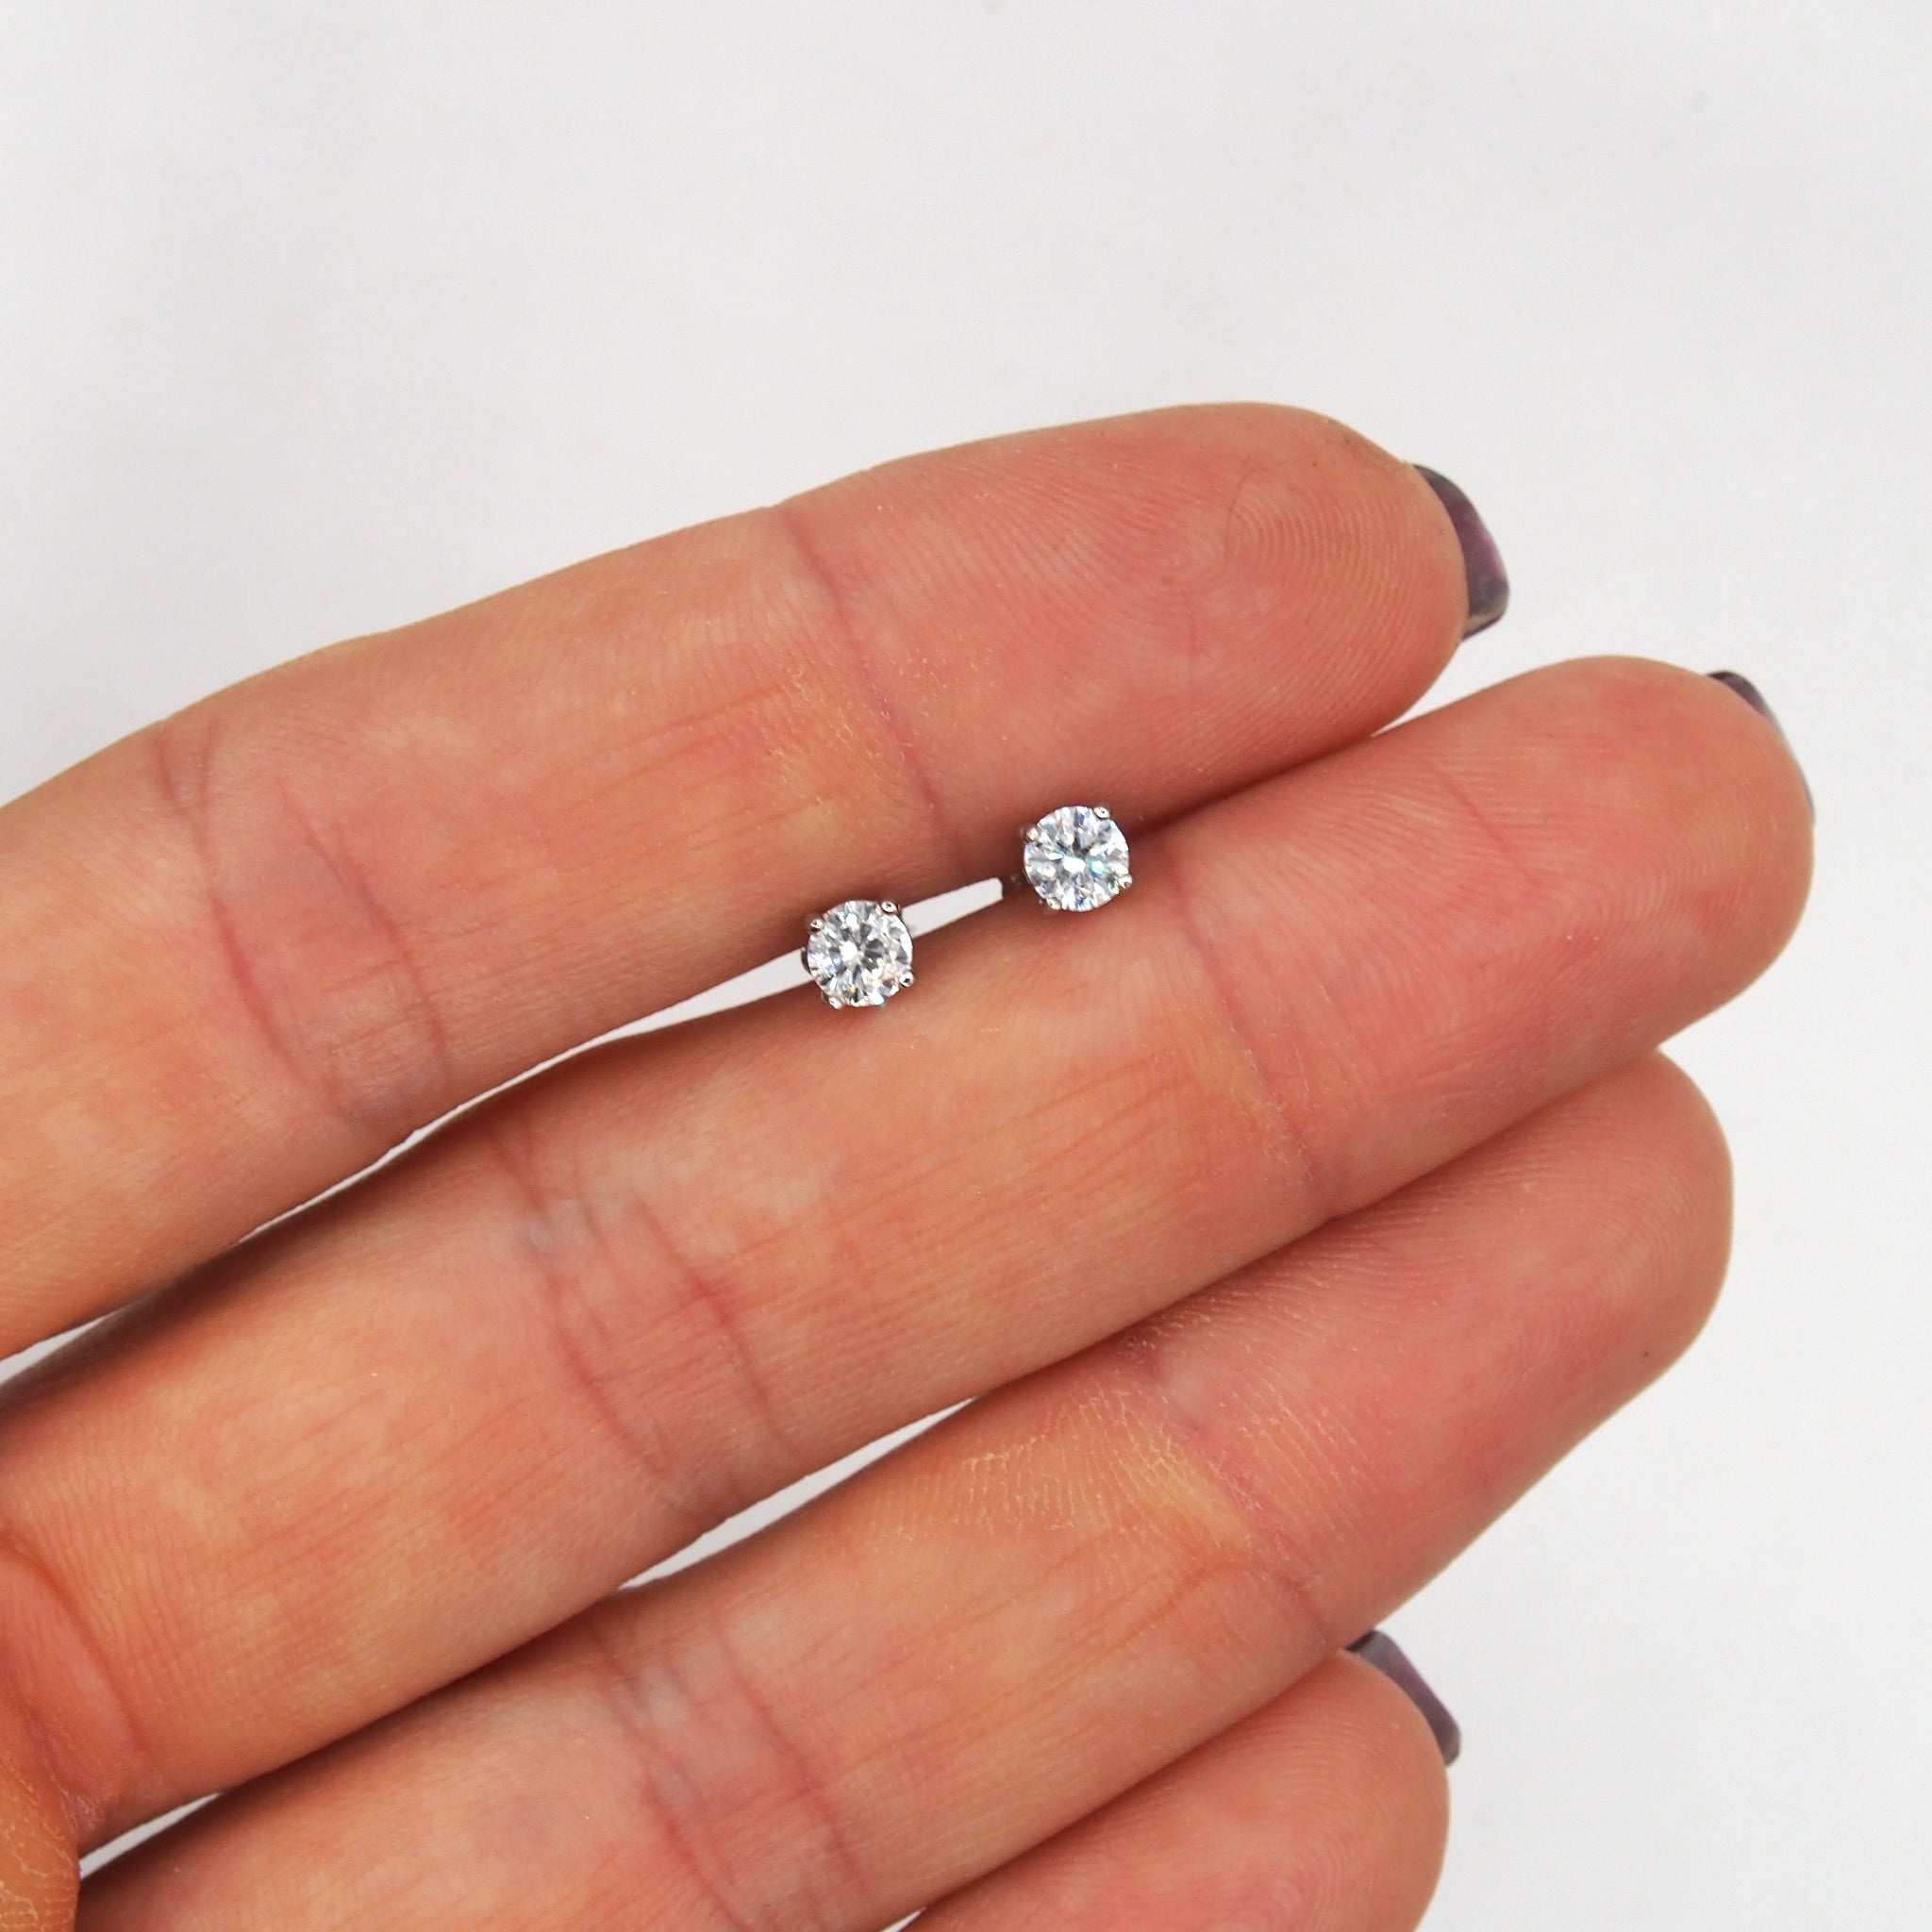 Exquisite lab grown diamond stud earrings in 14K white gold by Lico Jewelry, Montreal.